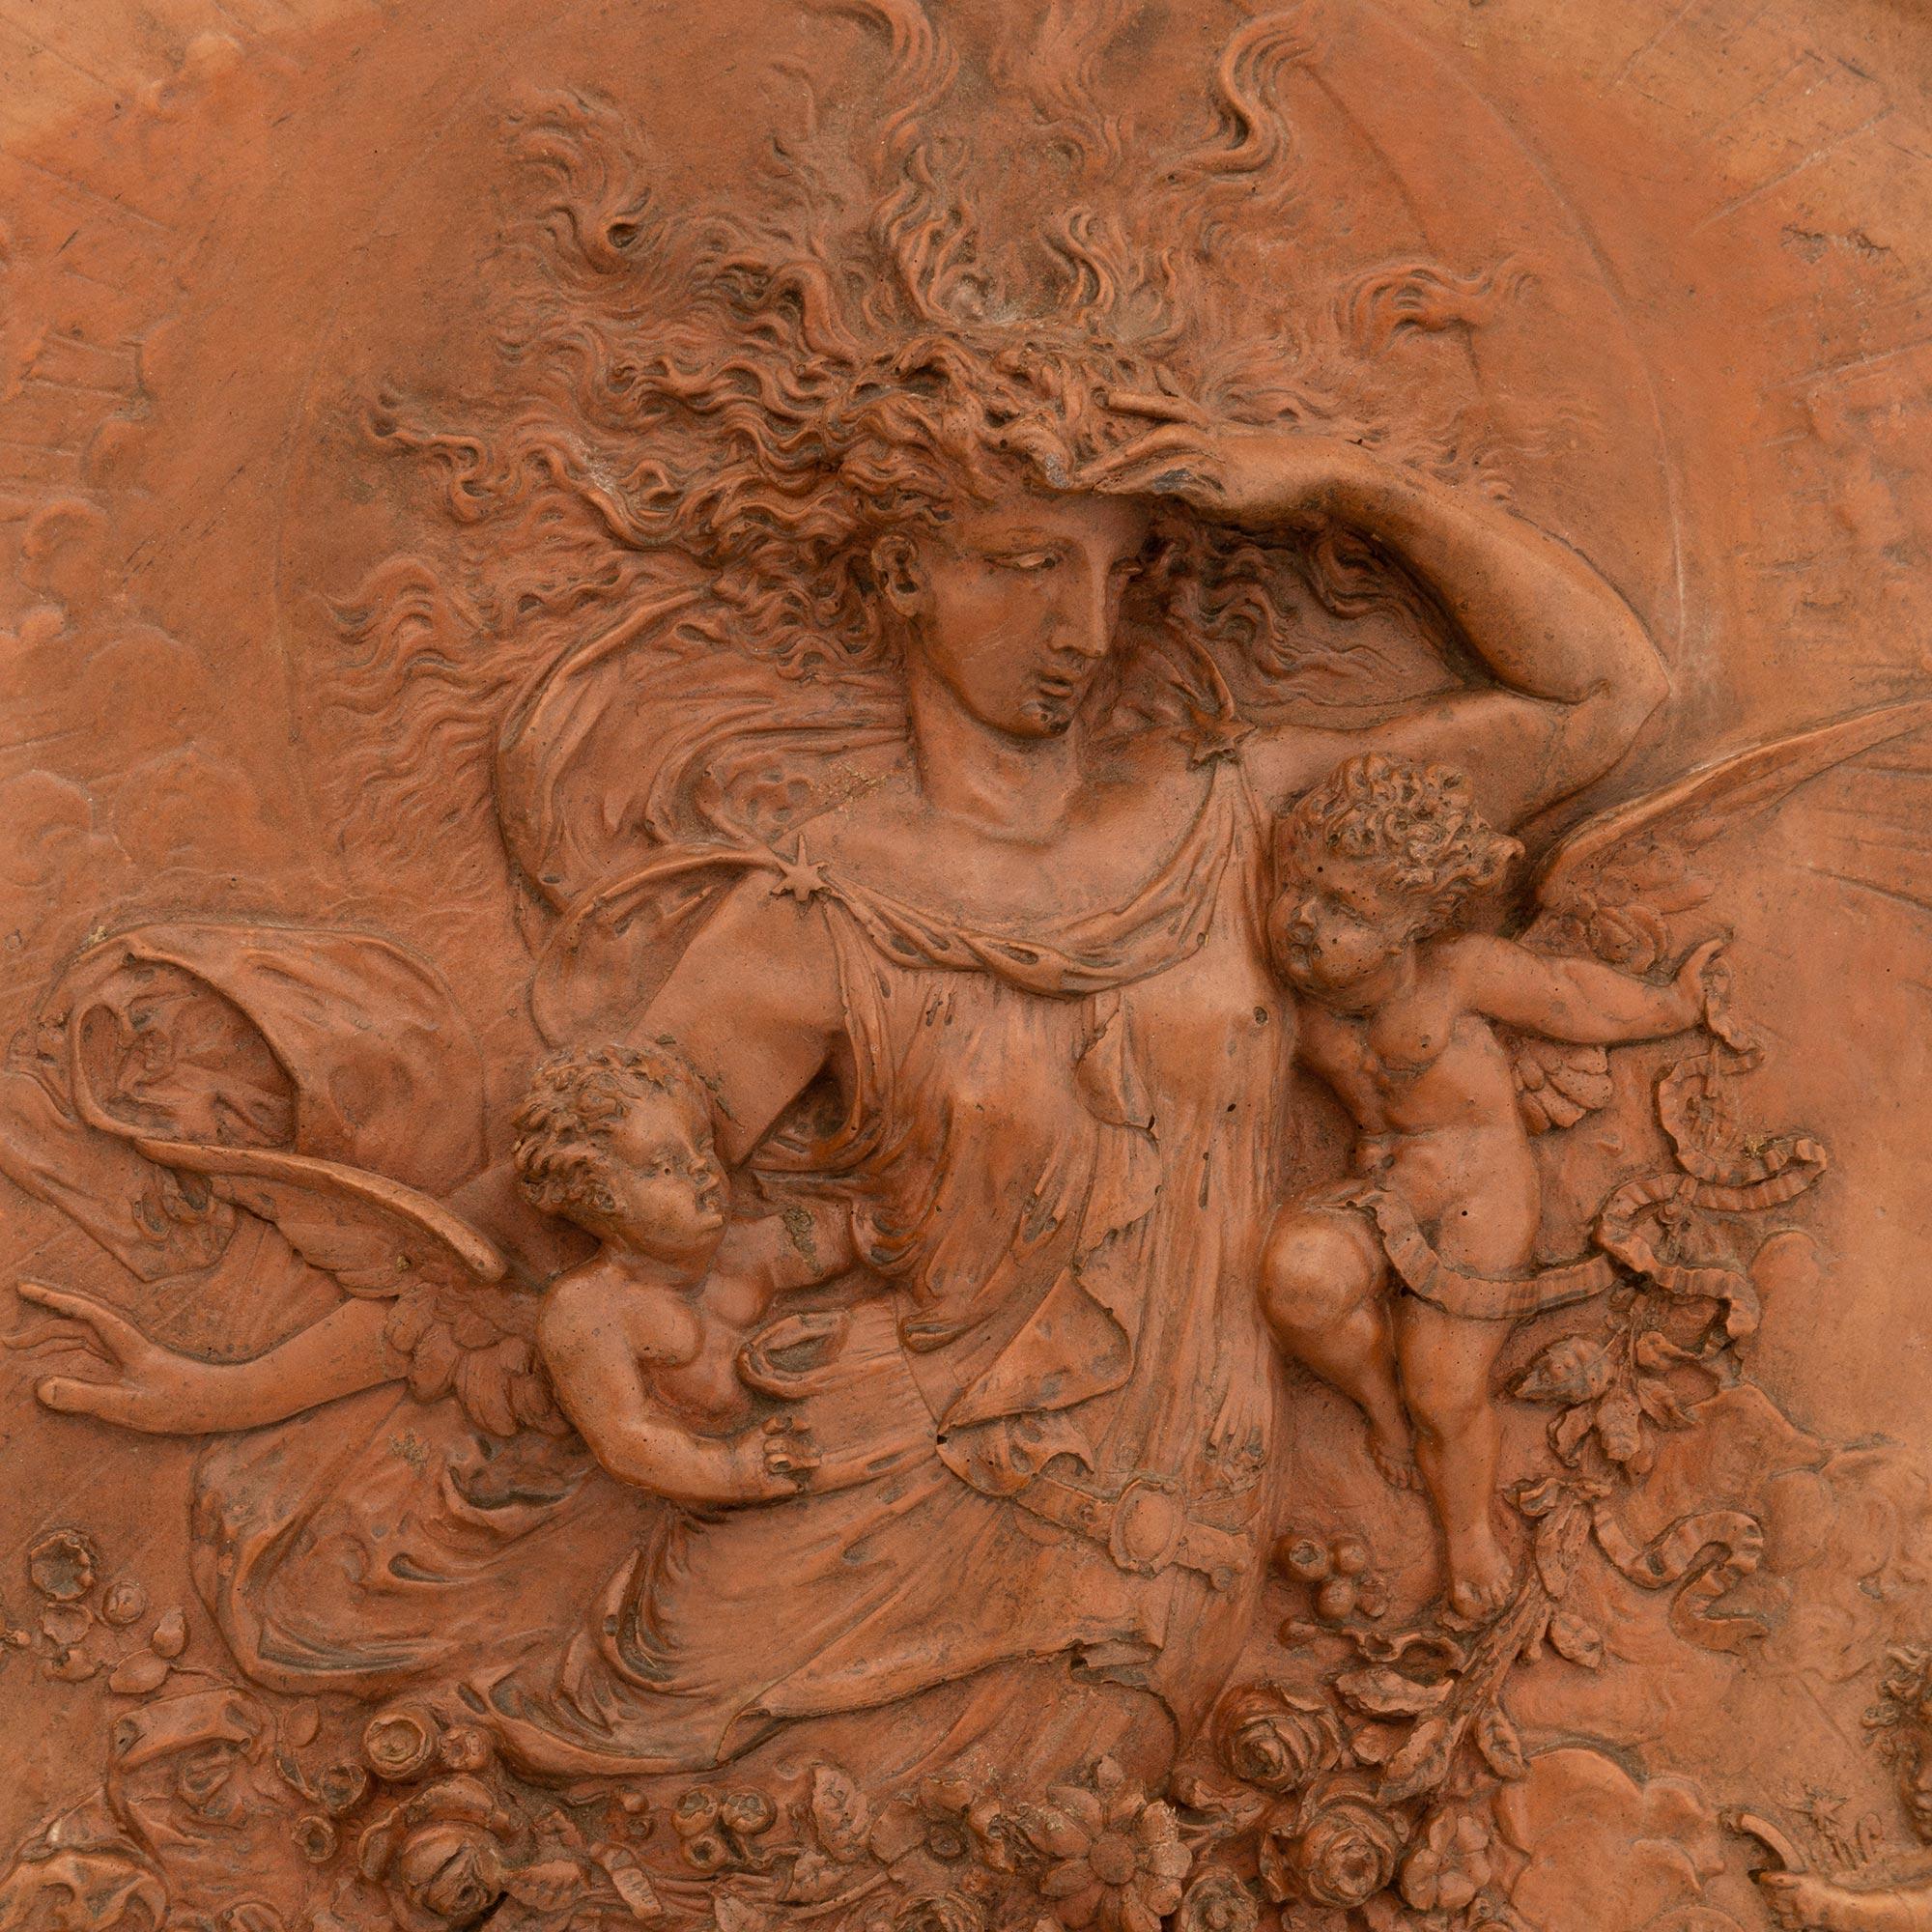 A unique and finely detailed Italian turn of the century Terra Cotta plaque of the goddess Flora. This elegant circular plaque is centered around a recessed panel of the Roman goddess of flowers and spring, Flora. Flora is depicted in a flowing robe